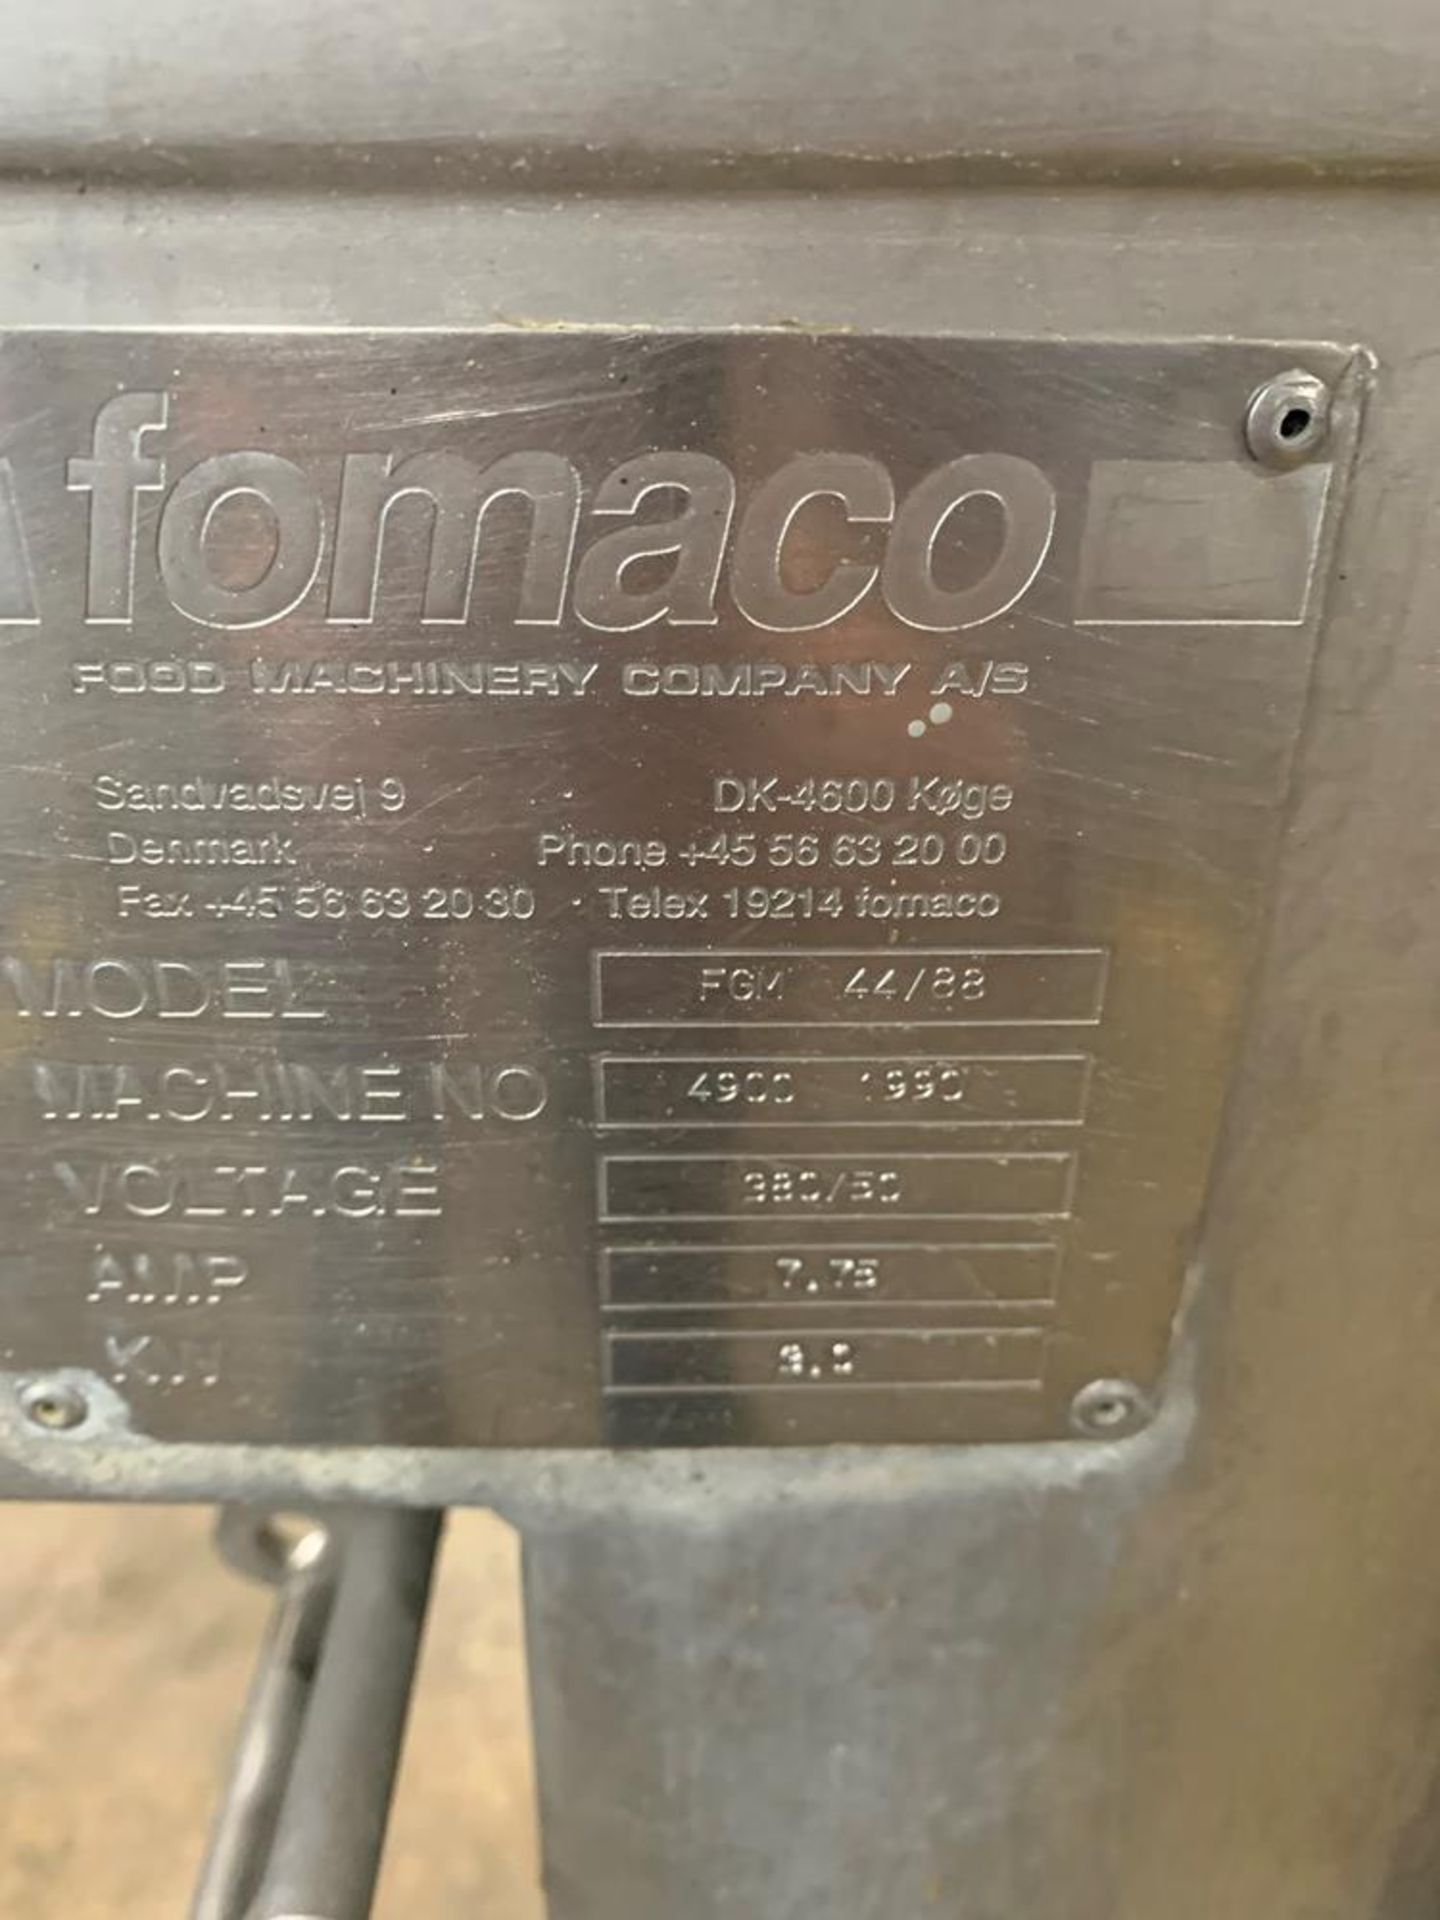 Fomaco Mdl. FGM 44/88 Injector, Ser. #49001990 (Located in Plano, IL) - Image 12 of 16